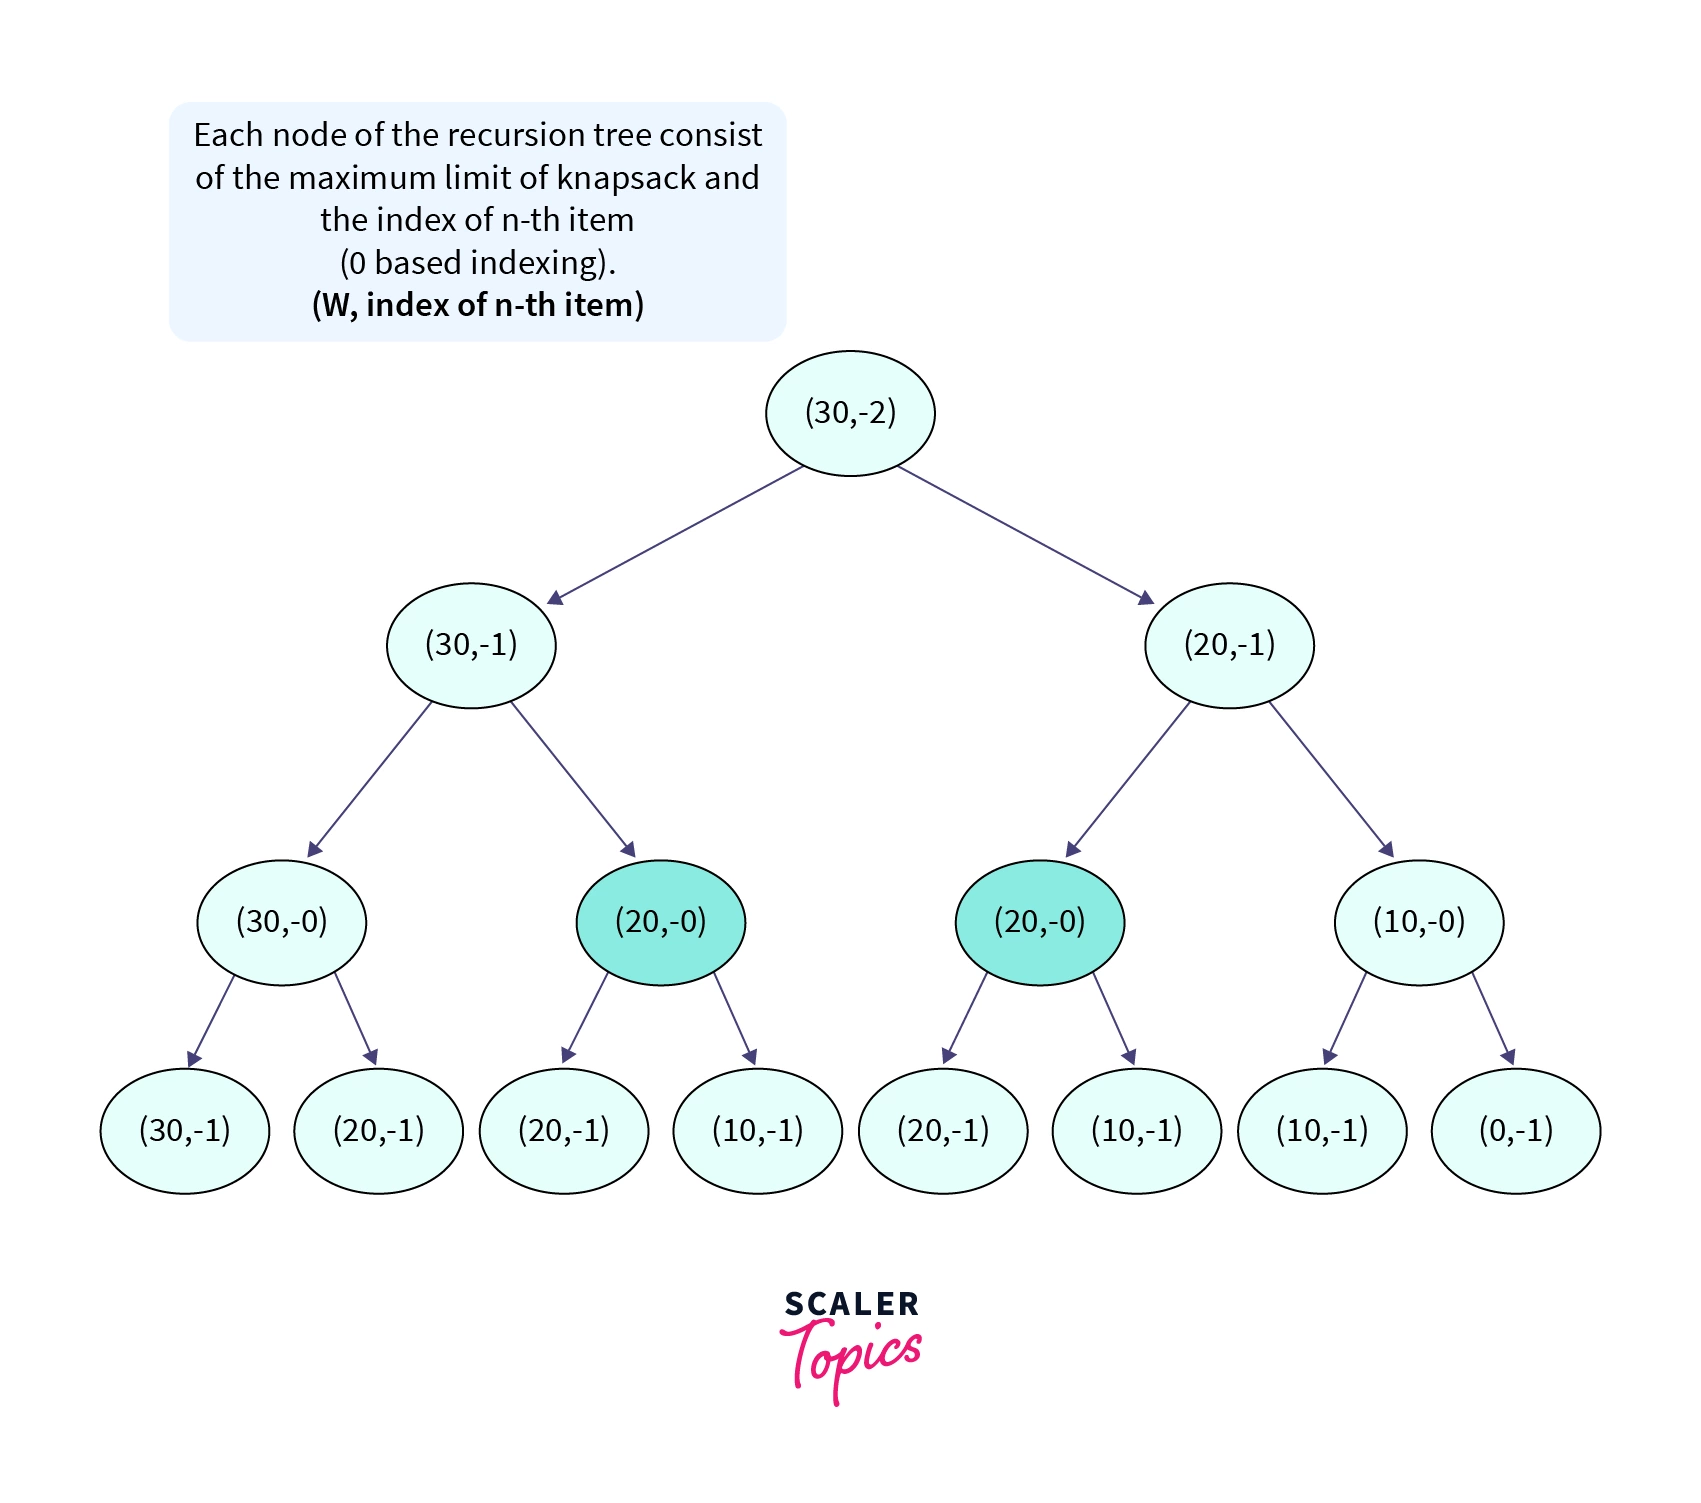 Recursion Tree for the input